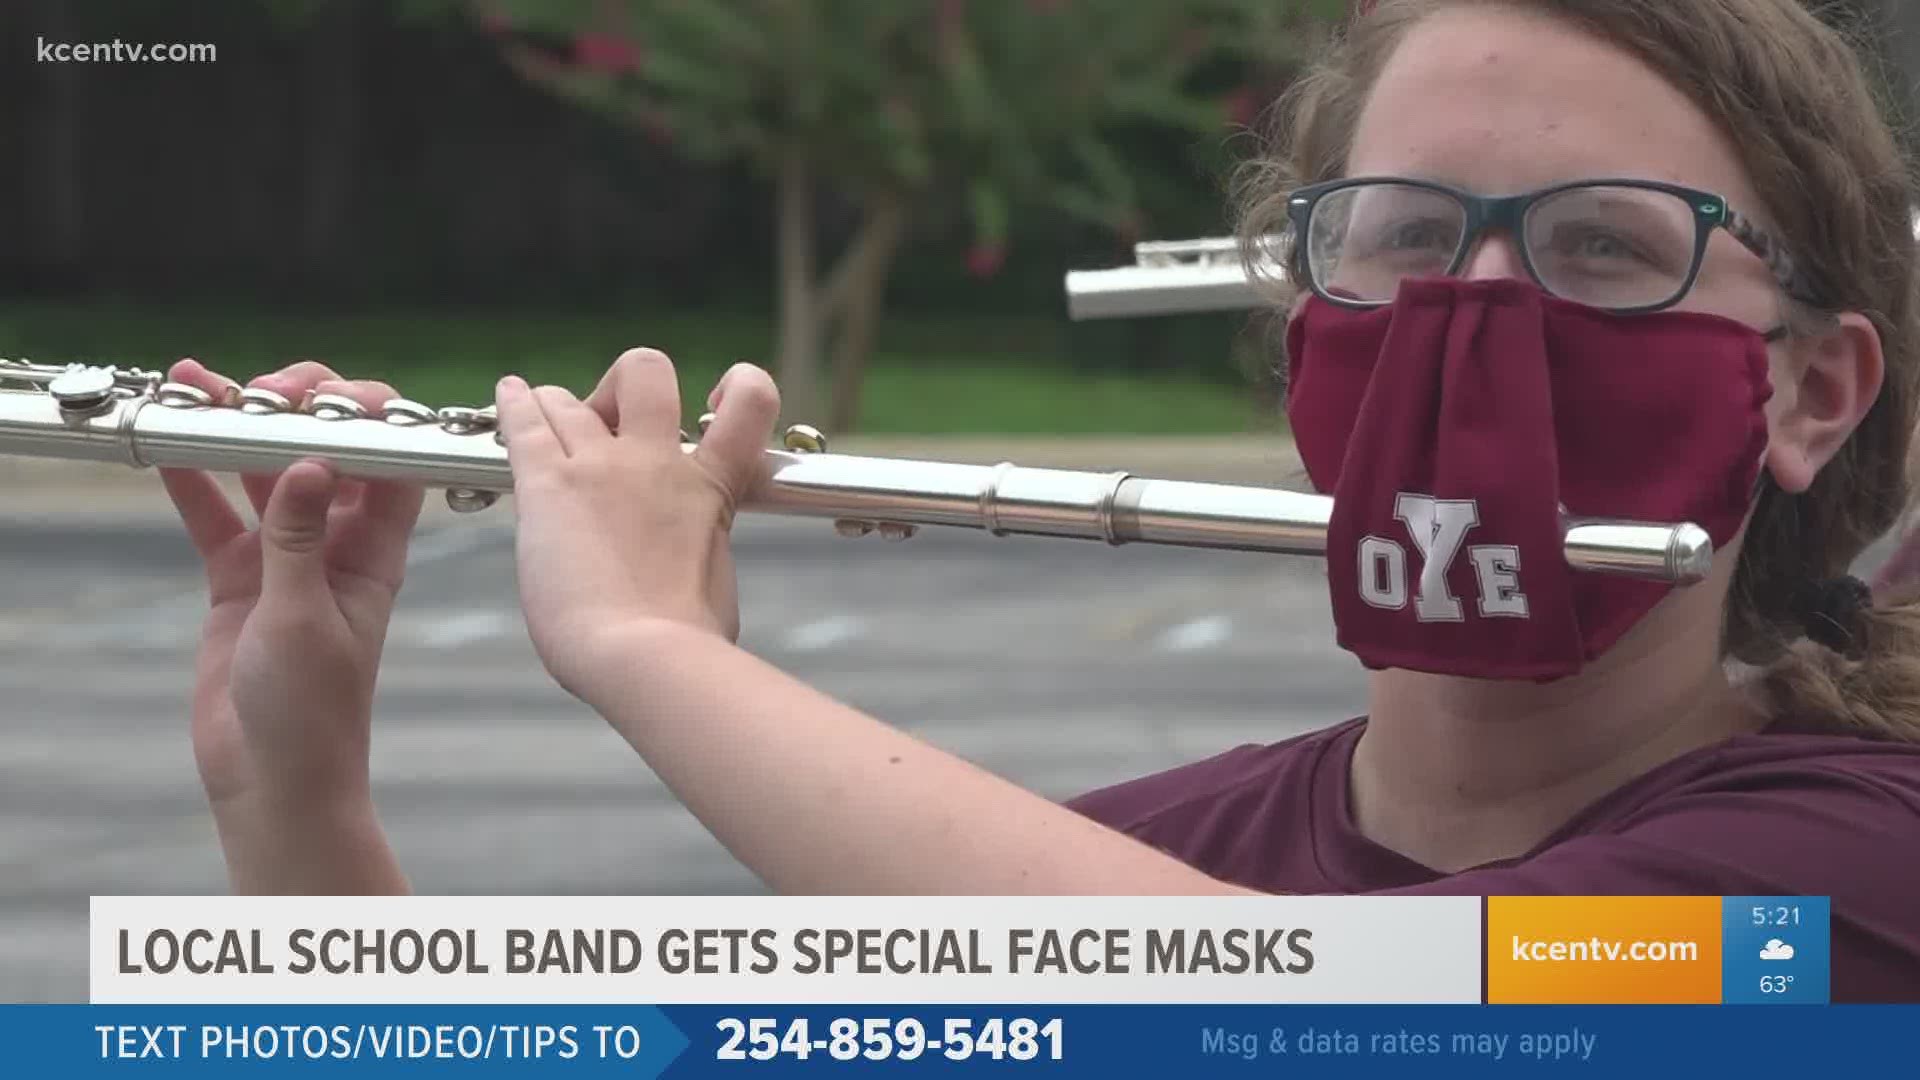 One local school has found a creative way to keep their band students safe. Texas Today's Maria Aguilera has the details.